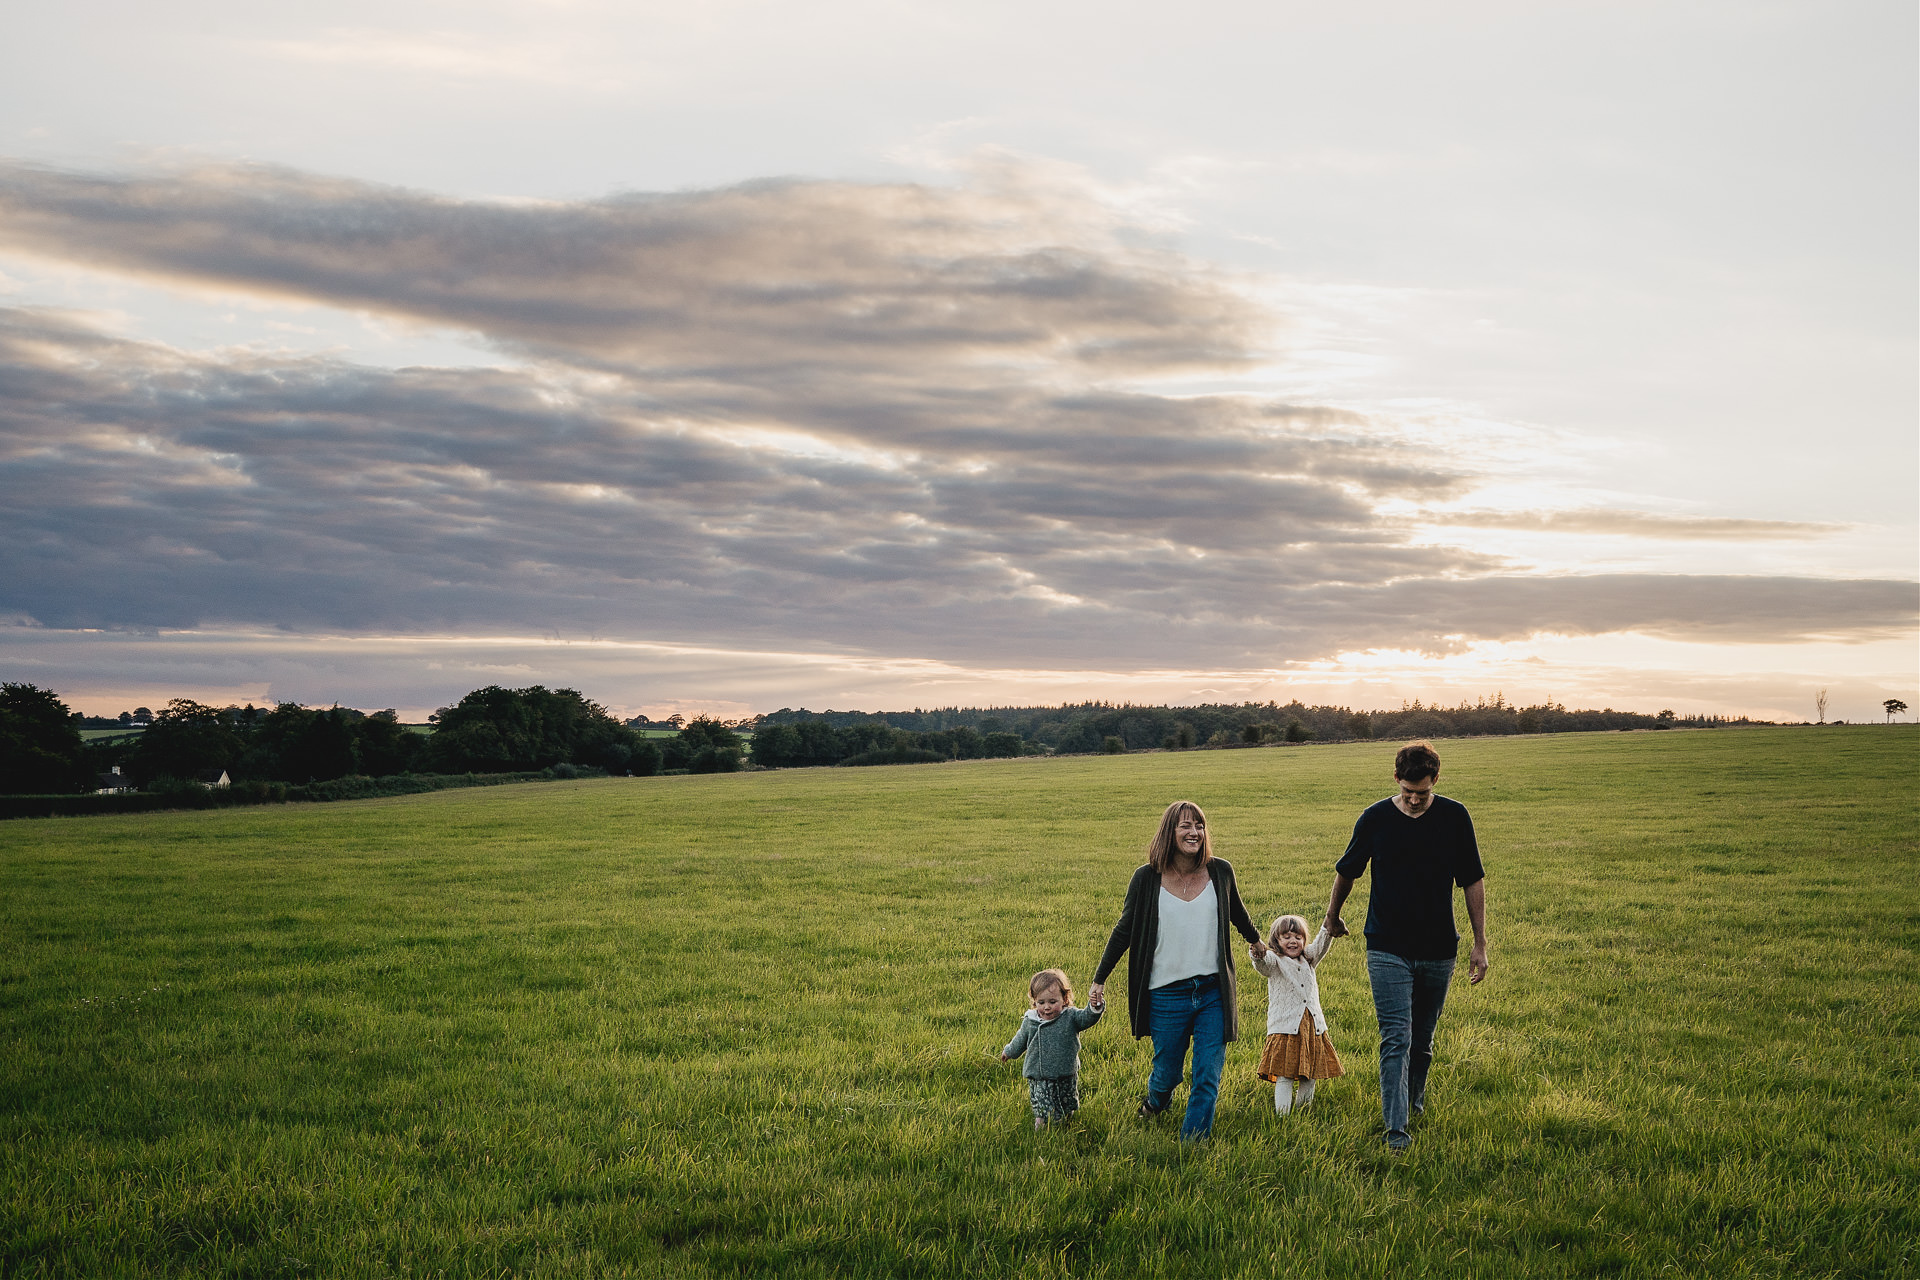 A family walking together across a field as the sun sets